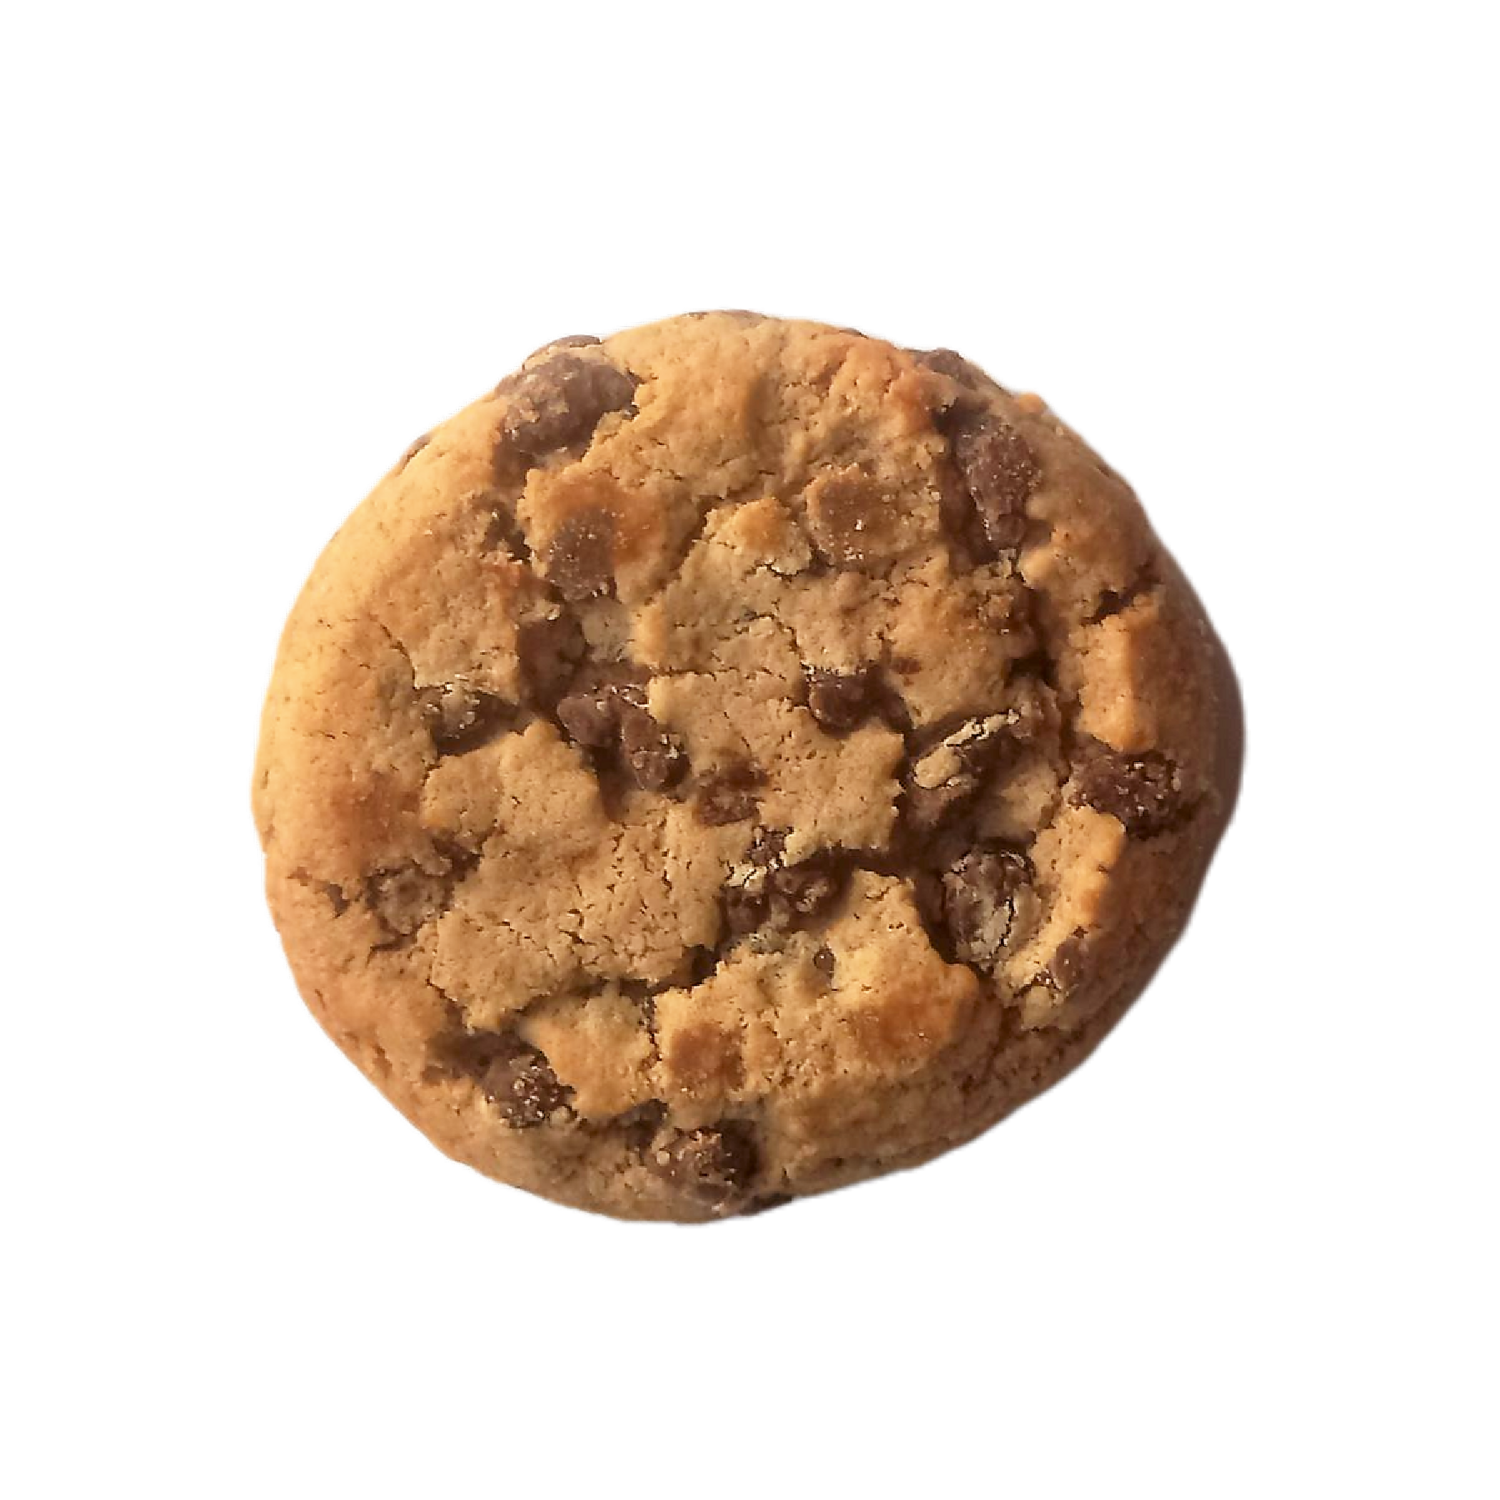 Soft Chocolate Chip Cookie (22g, 1 Cookie)